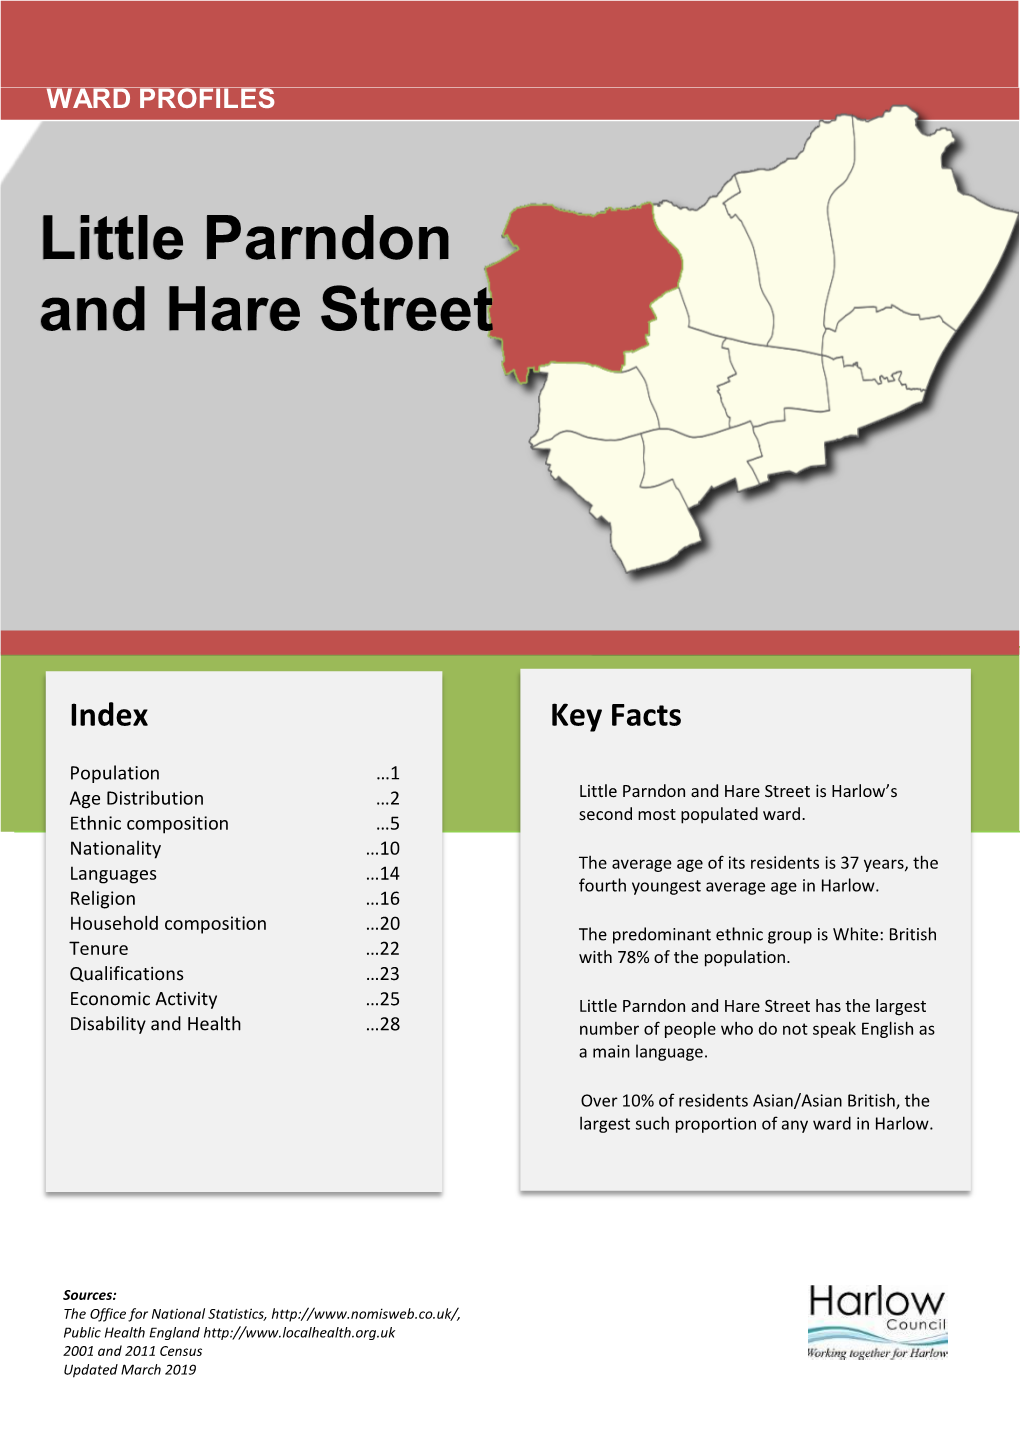 Little Parndon and Hare Street